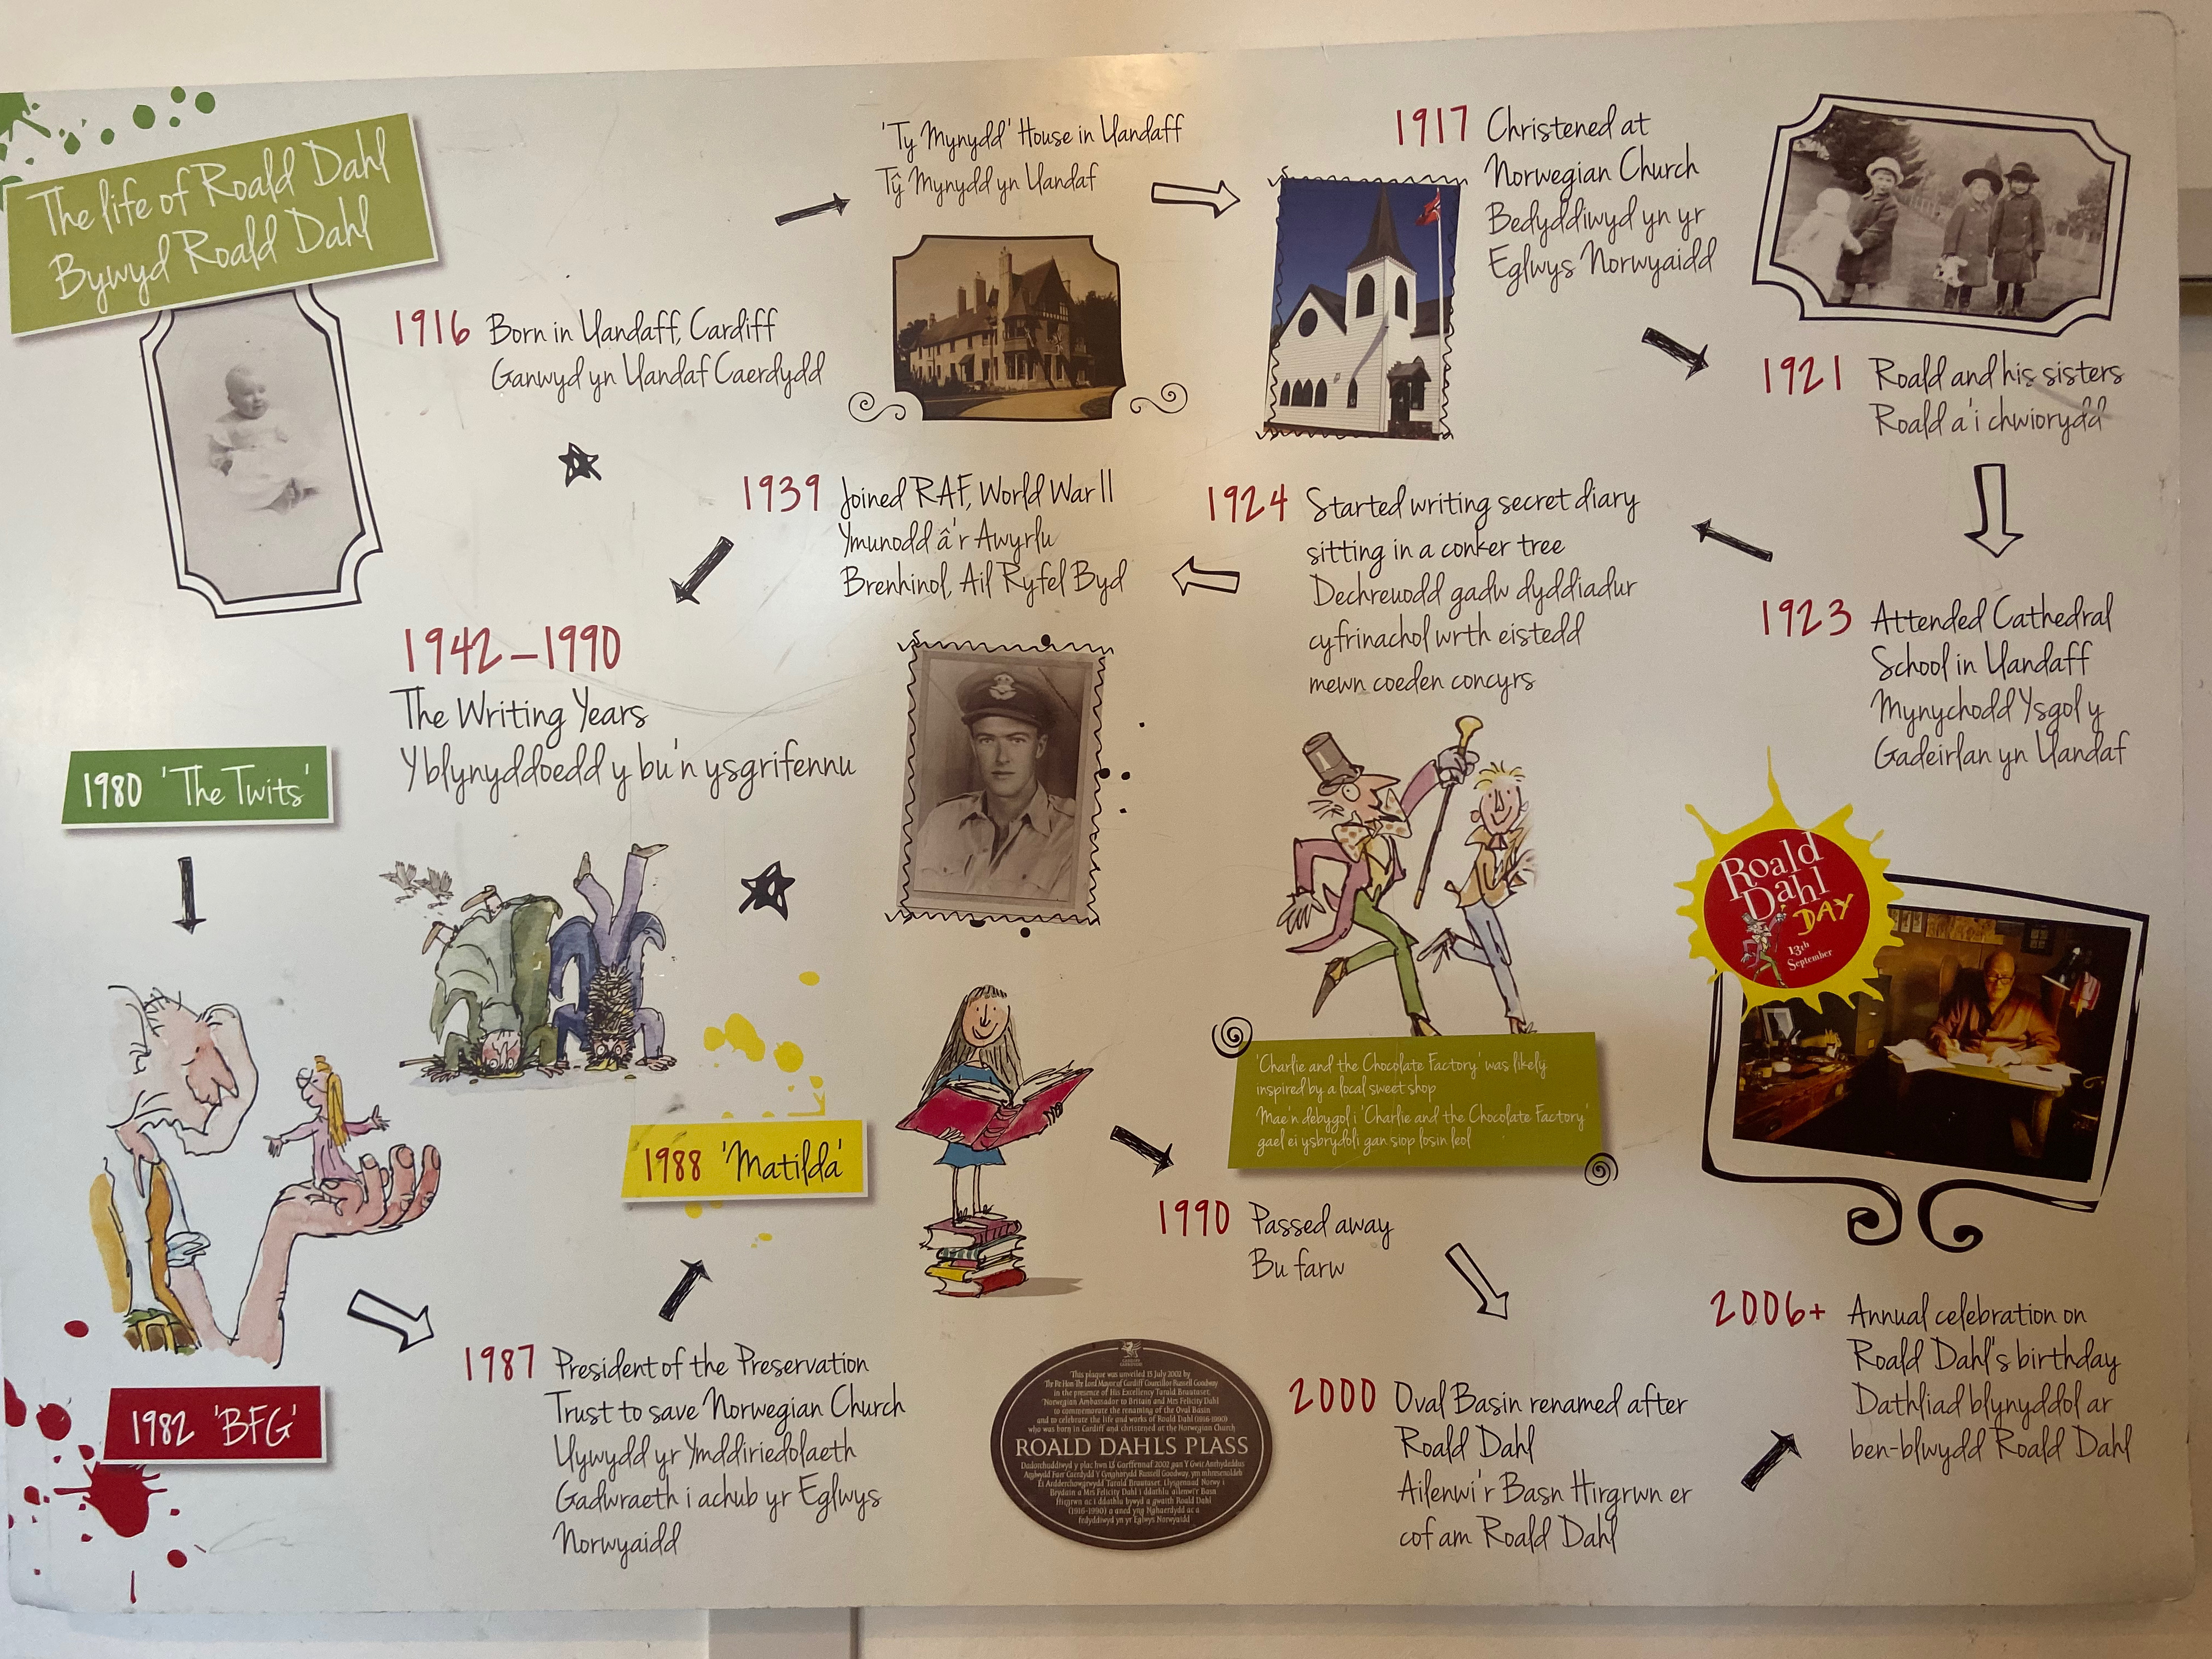 A wall feature displays a timeline of Roald Dahl's life and links to Cardiff 